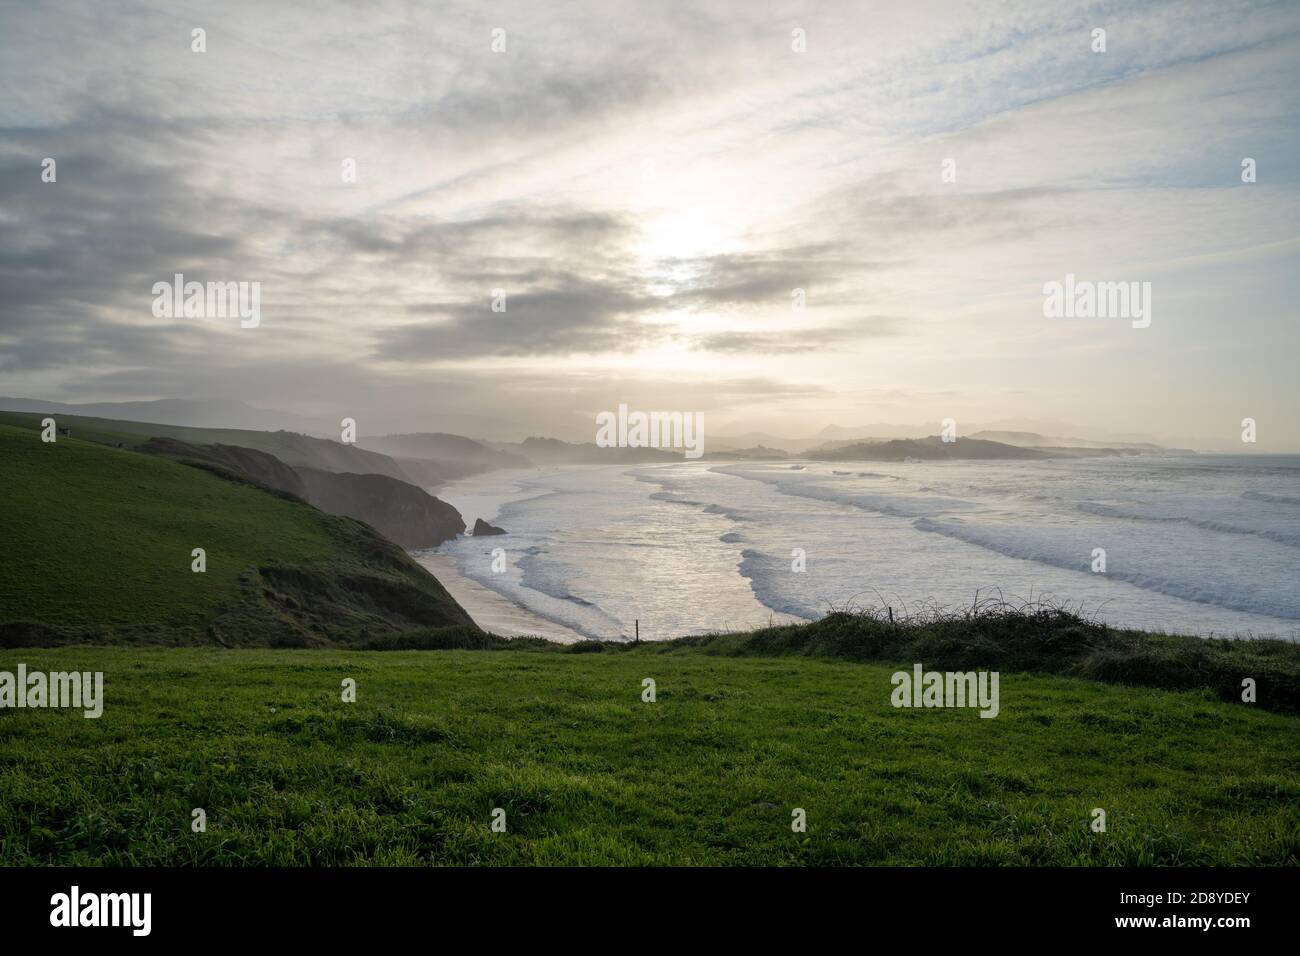 Tall green grassy cliffs drop down to the ocean coast in northern Spain Stock Photo